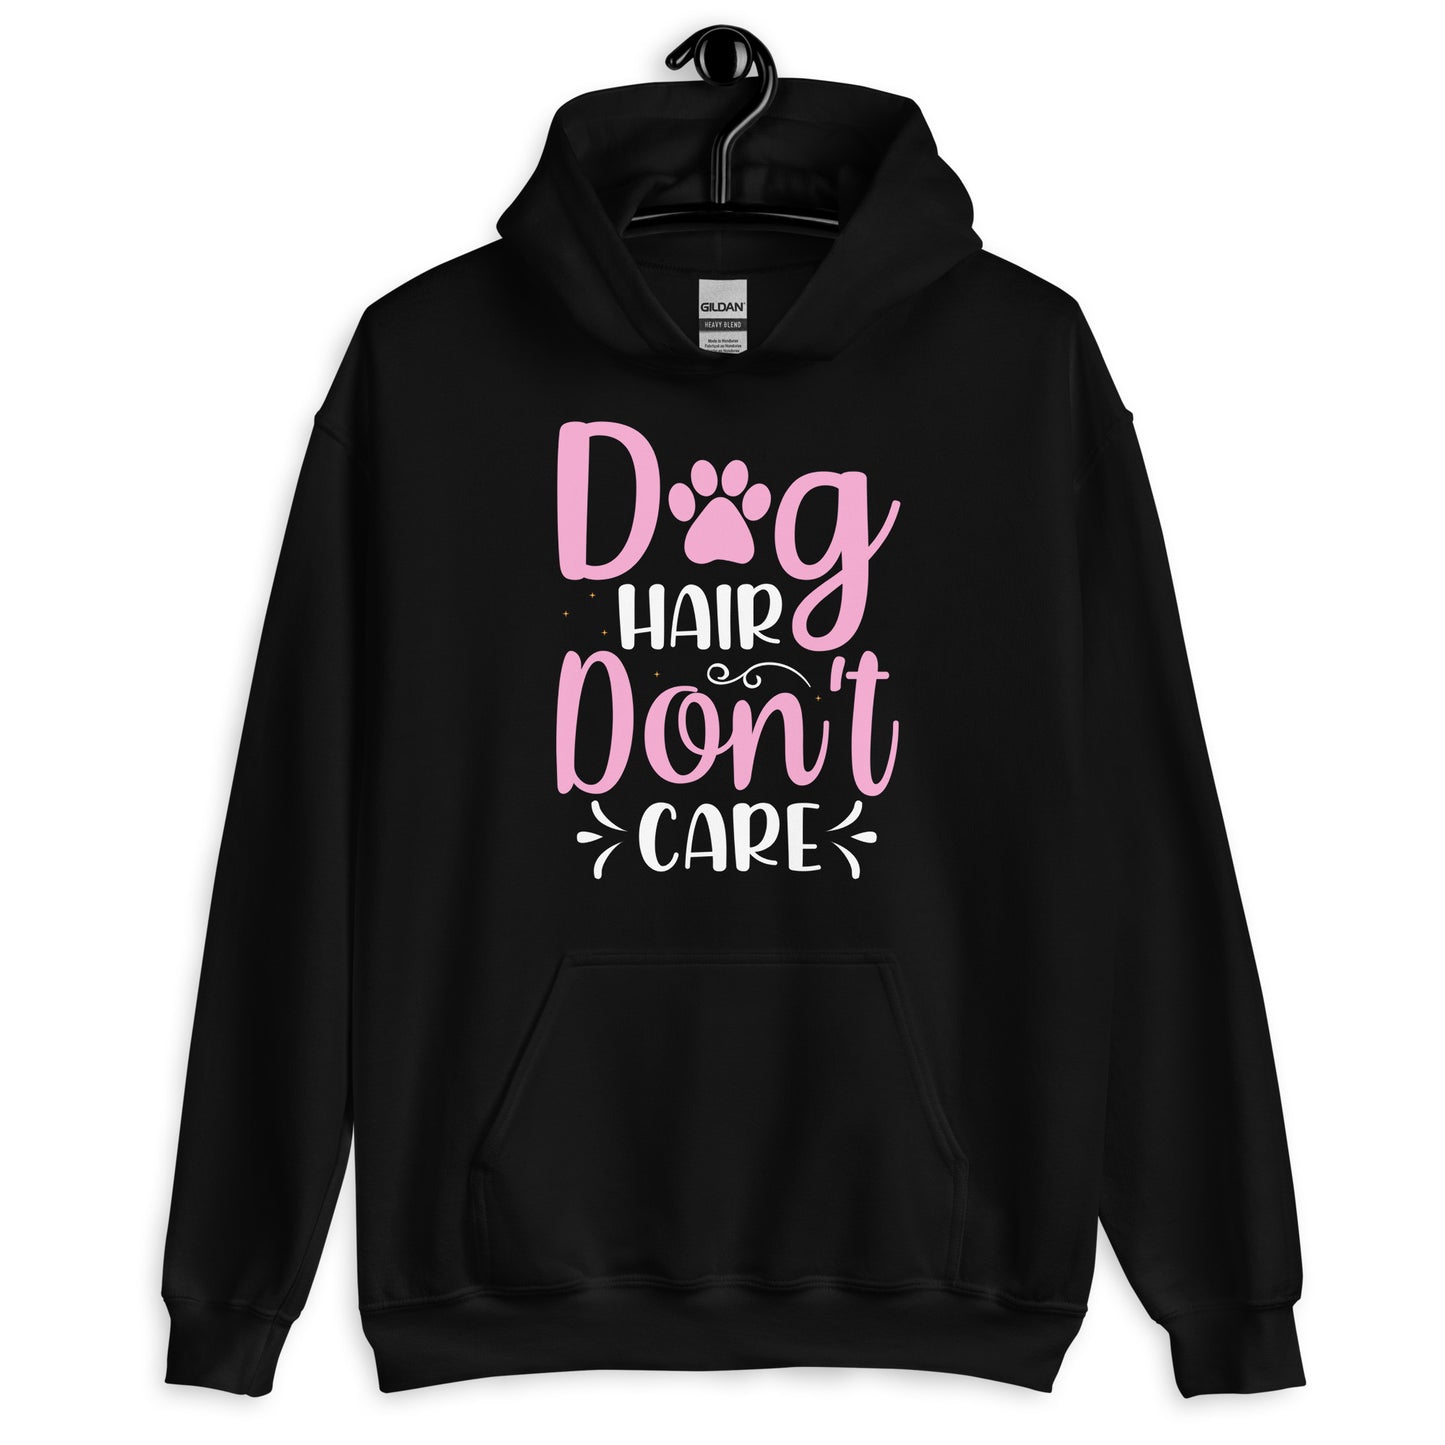 Dog Hair Don't Care Unisex Hoodie